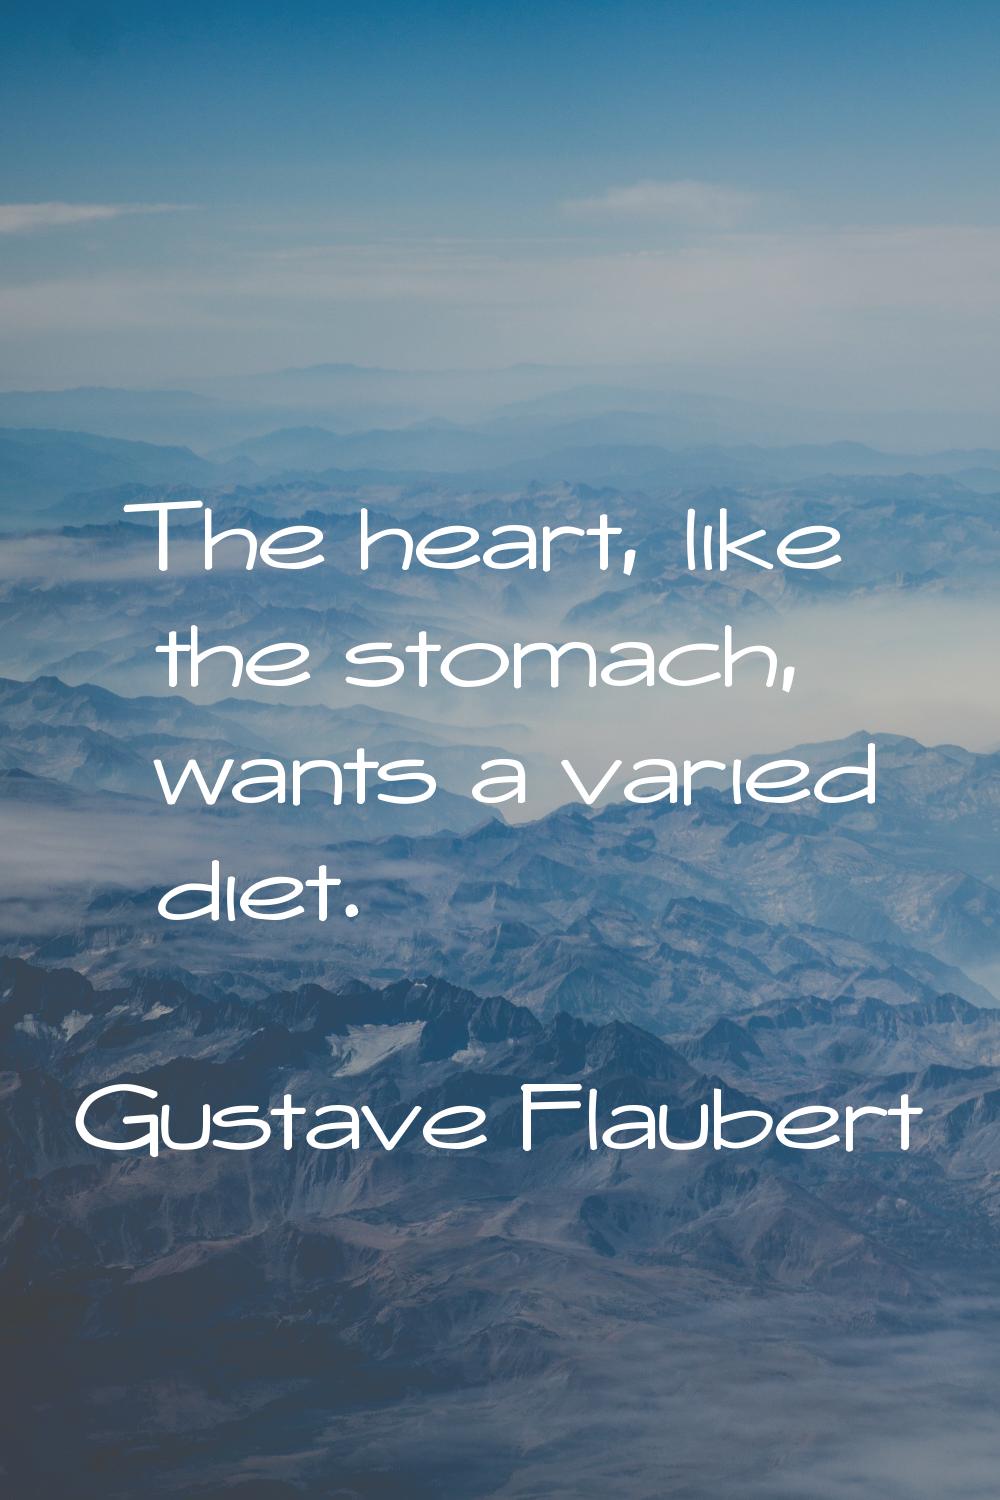 The heart, like the stomach, wants a varied diet.